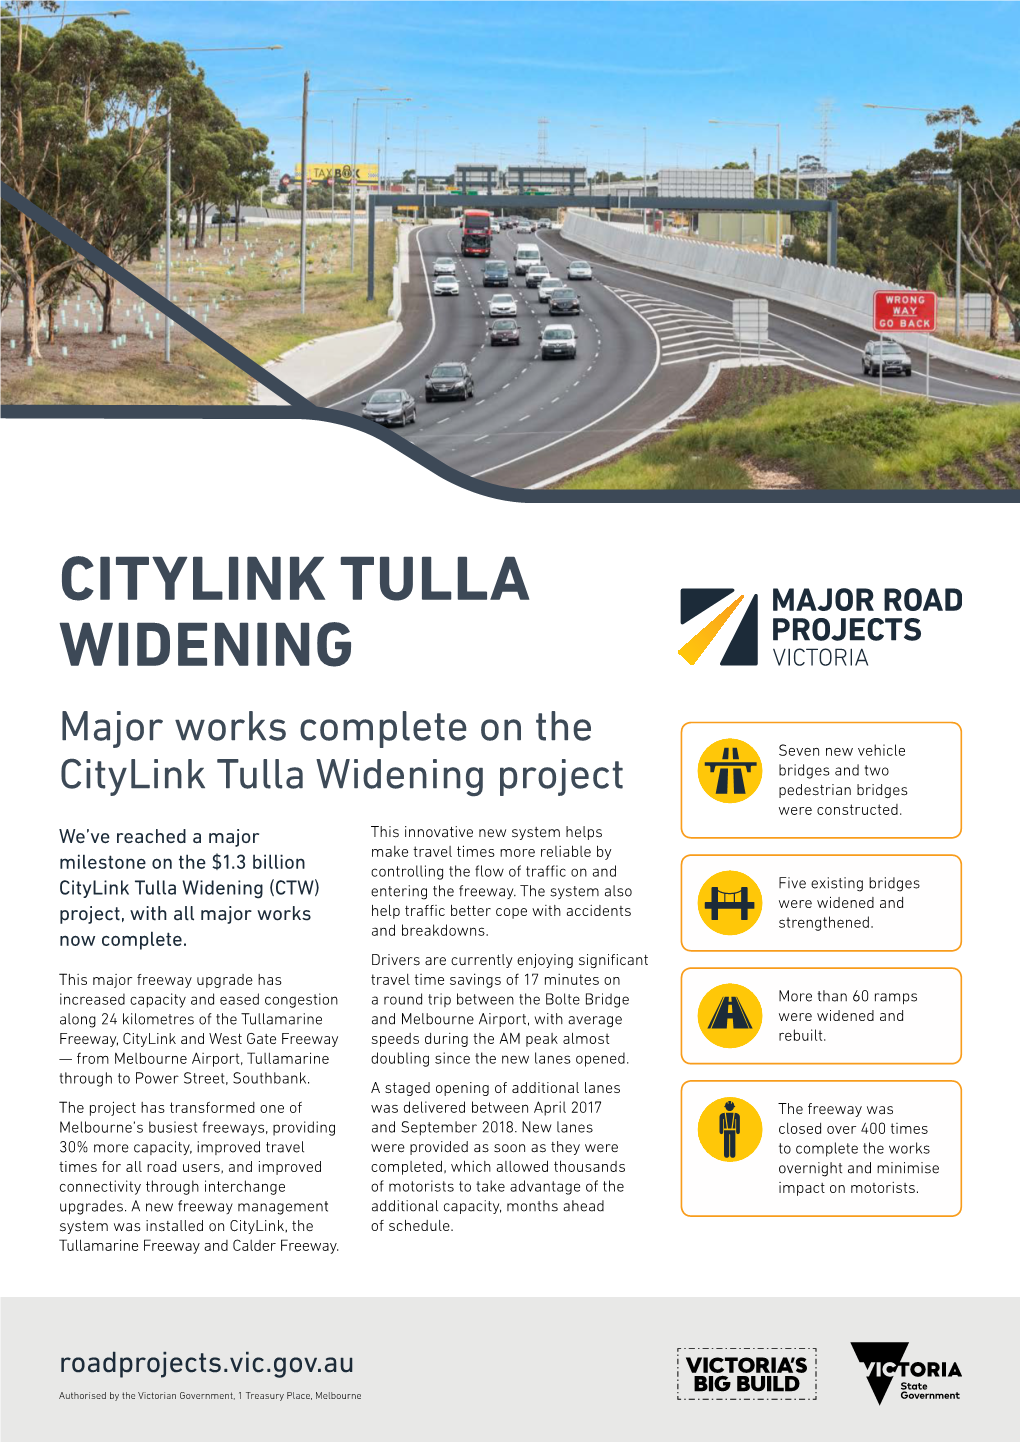 CITYLINK TULLA WIDENING Major Works Complete on the Seven New Vehicle Bridges and Two Citylink Tulla Widening Project Pedestrian Bridges Were Constructed